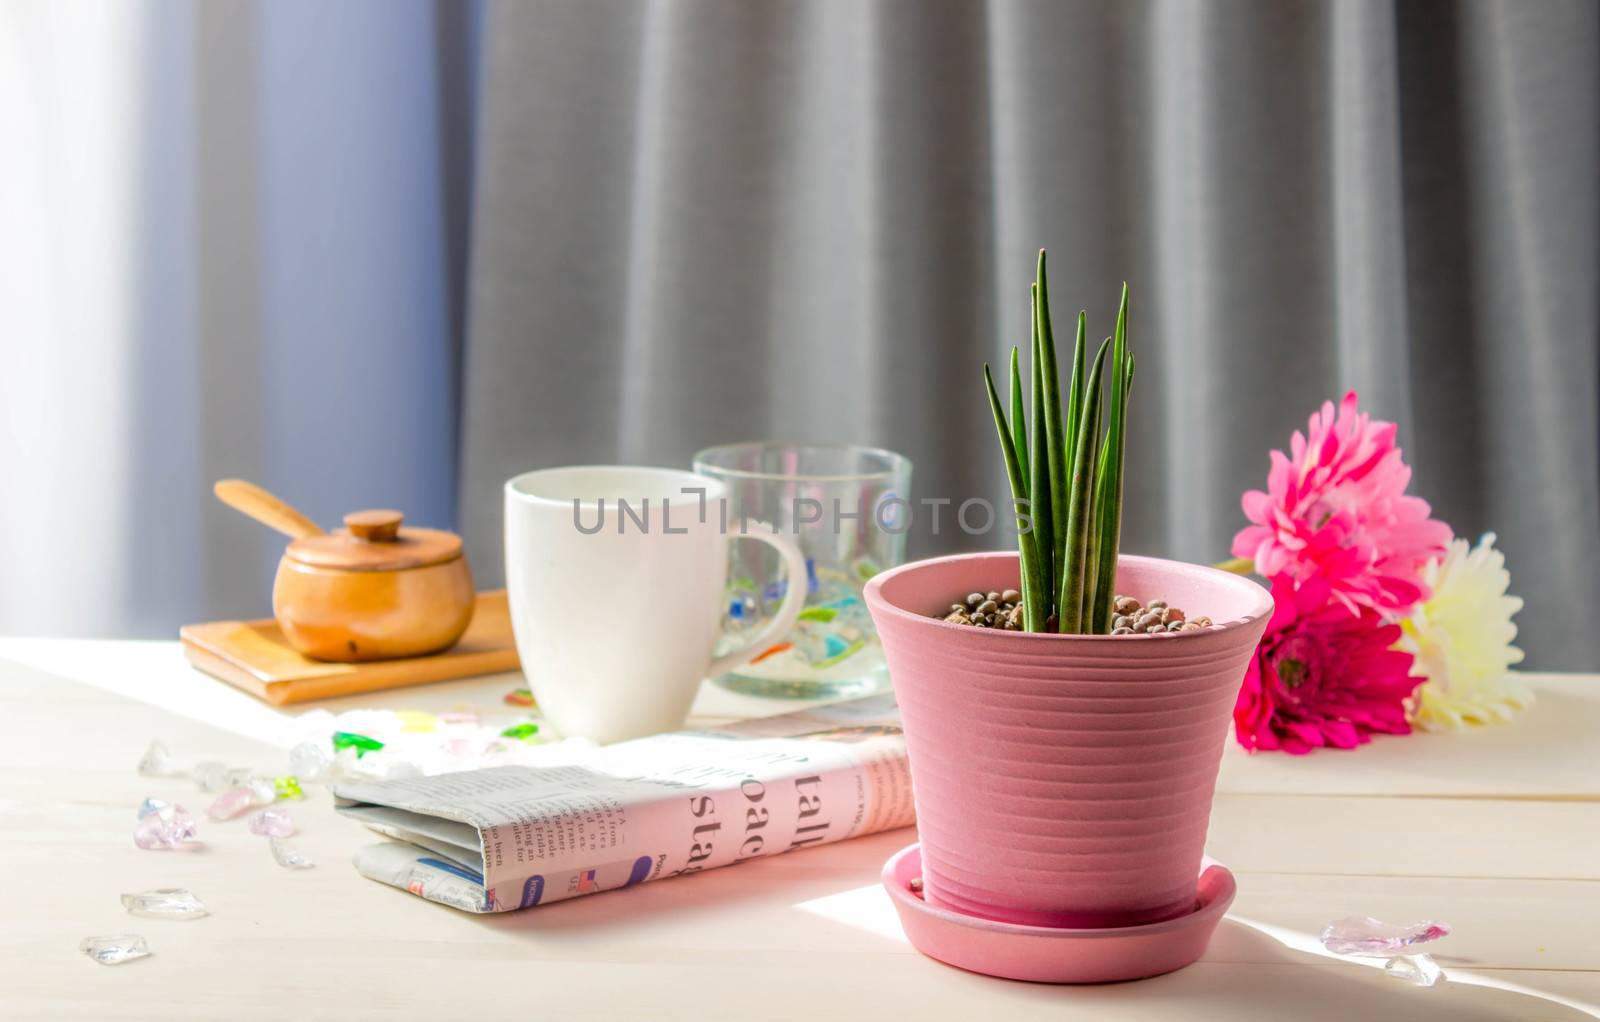 bacularis,beautiful,beauty,botany,break,breakfast,bright,cafe,coffee,cup,cylindrica,day,decorative,design,desk,drink,flower,freshness,glass,green,home,houseplant,indoor,interior,kitchen,leaf,life,light,live,modern,morning,natural,nature,newspaper,office,ornamental,plant,pot,potting,room,sansevieria,shape,spaghetti,sunlight,table,tea,window,wood,woodenCoffee cup, Glass pieces,newspaper with Sansevieria Stucky planted in a pink pot on table at the window.